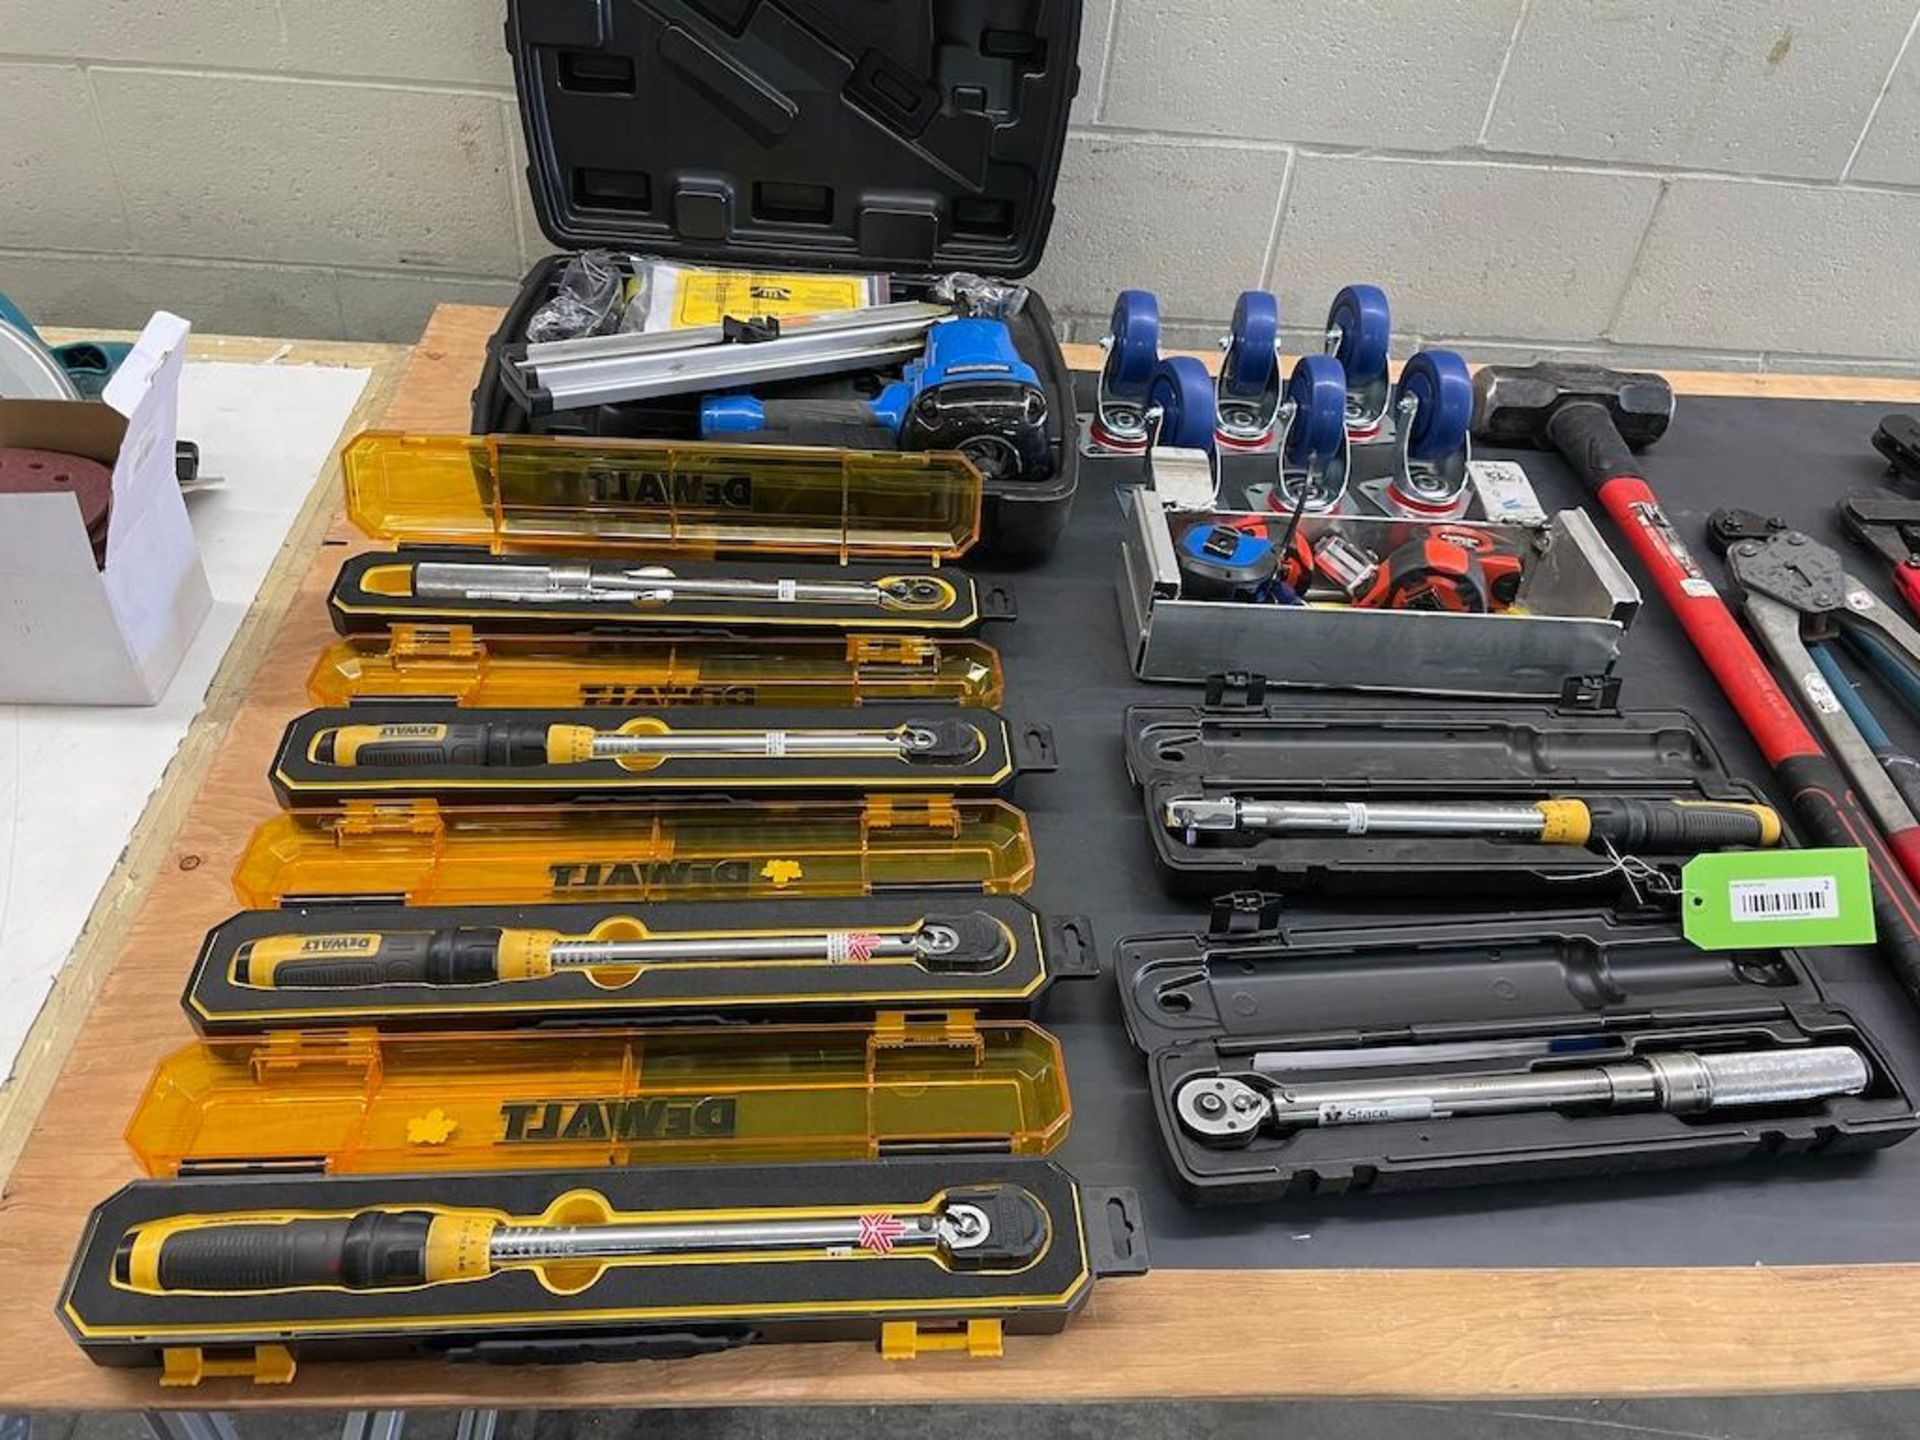 LOT: ASSORTED TOOLS, TORQUE WRENCHES, NAIL GUN, CASTERS [TROIS RIVIERES] *PLEASE NOTE, EXCLUSIVE RIG - Image 2 of 3